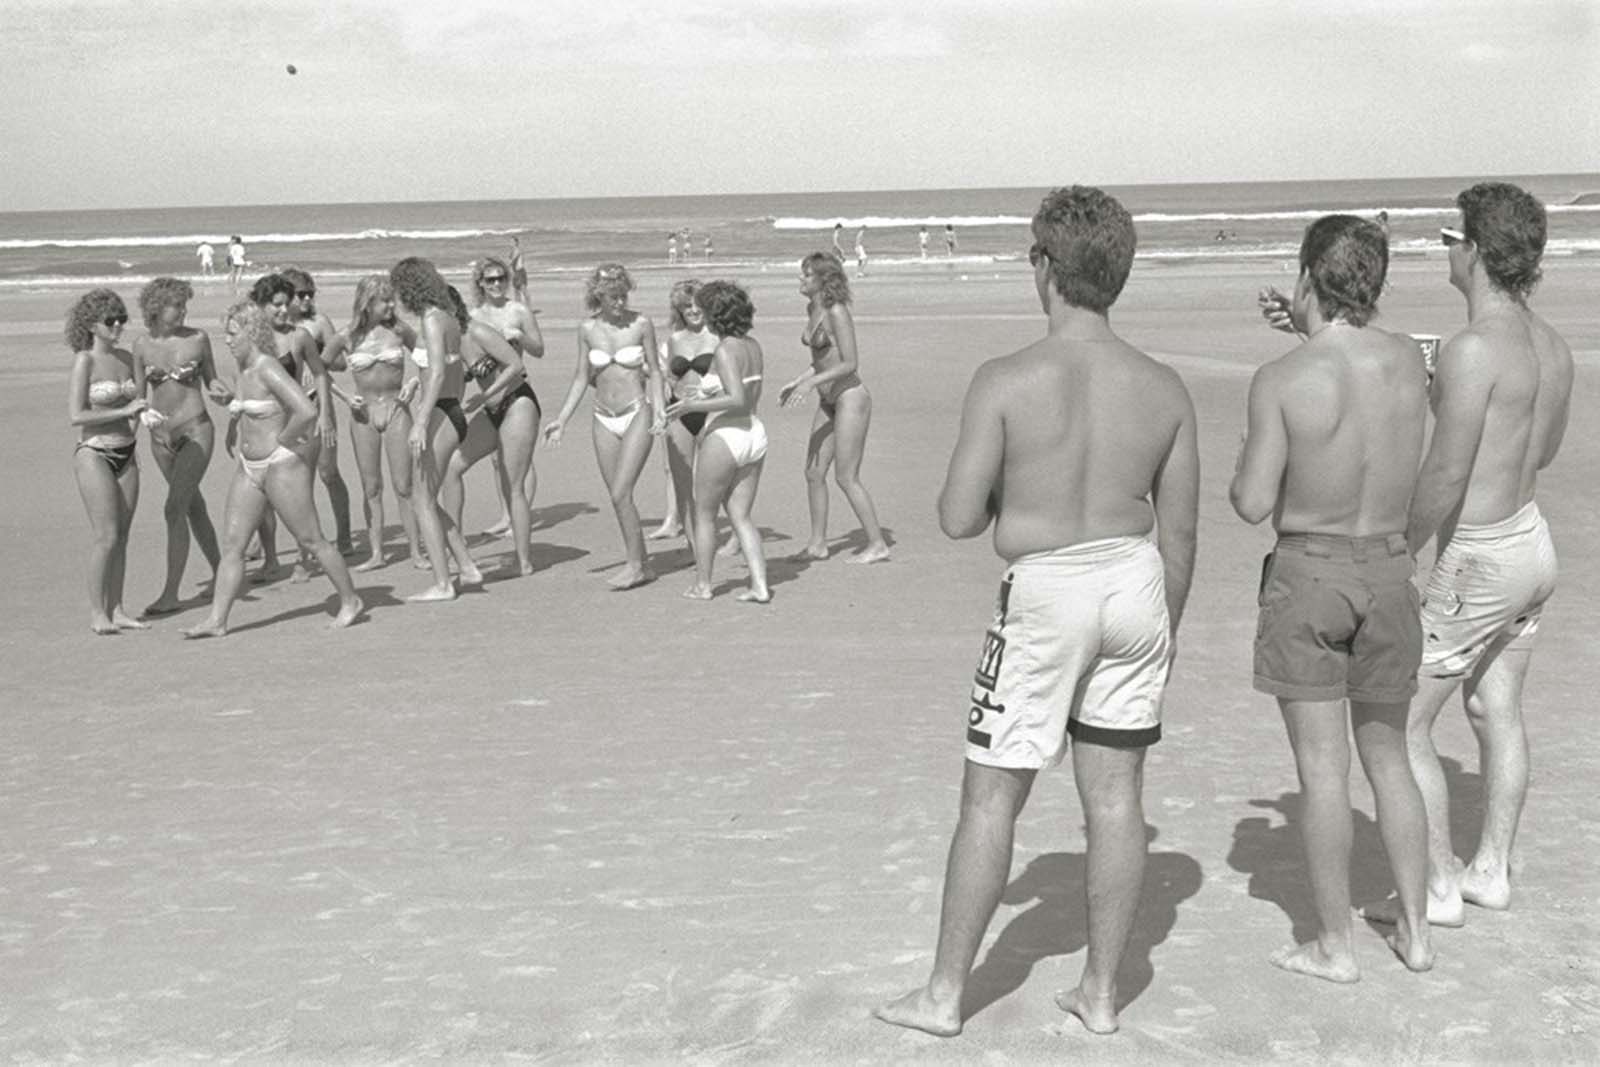 This is how Spring Break looked like in the 1980s.